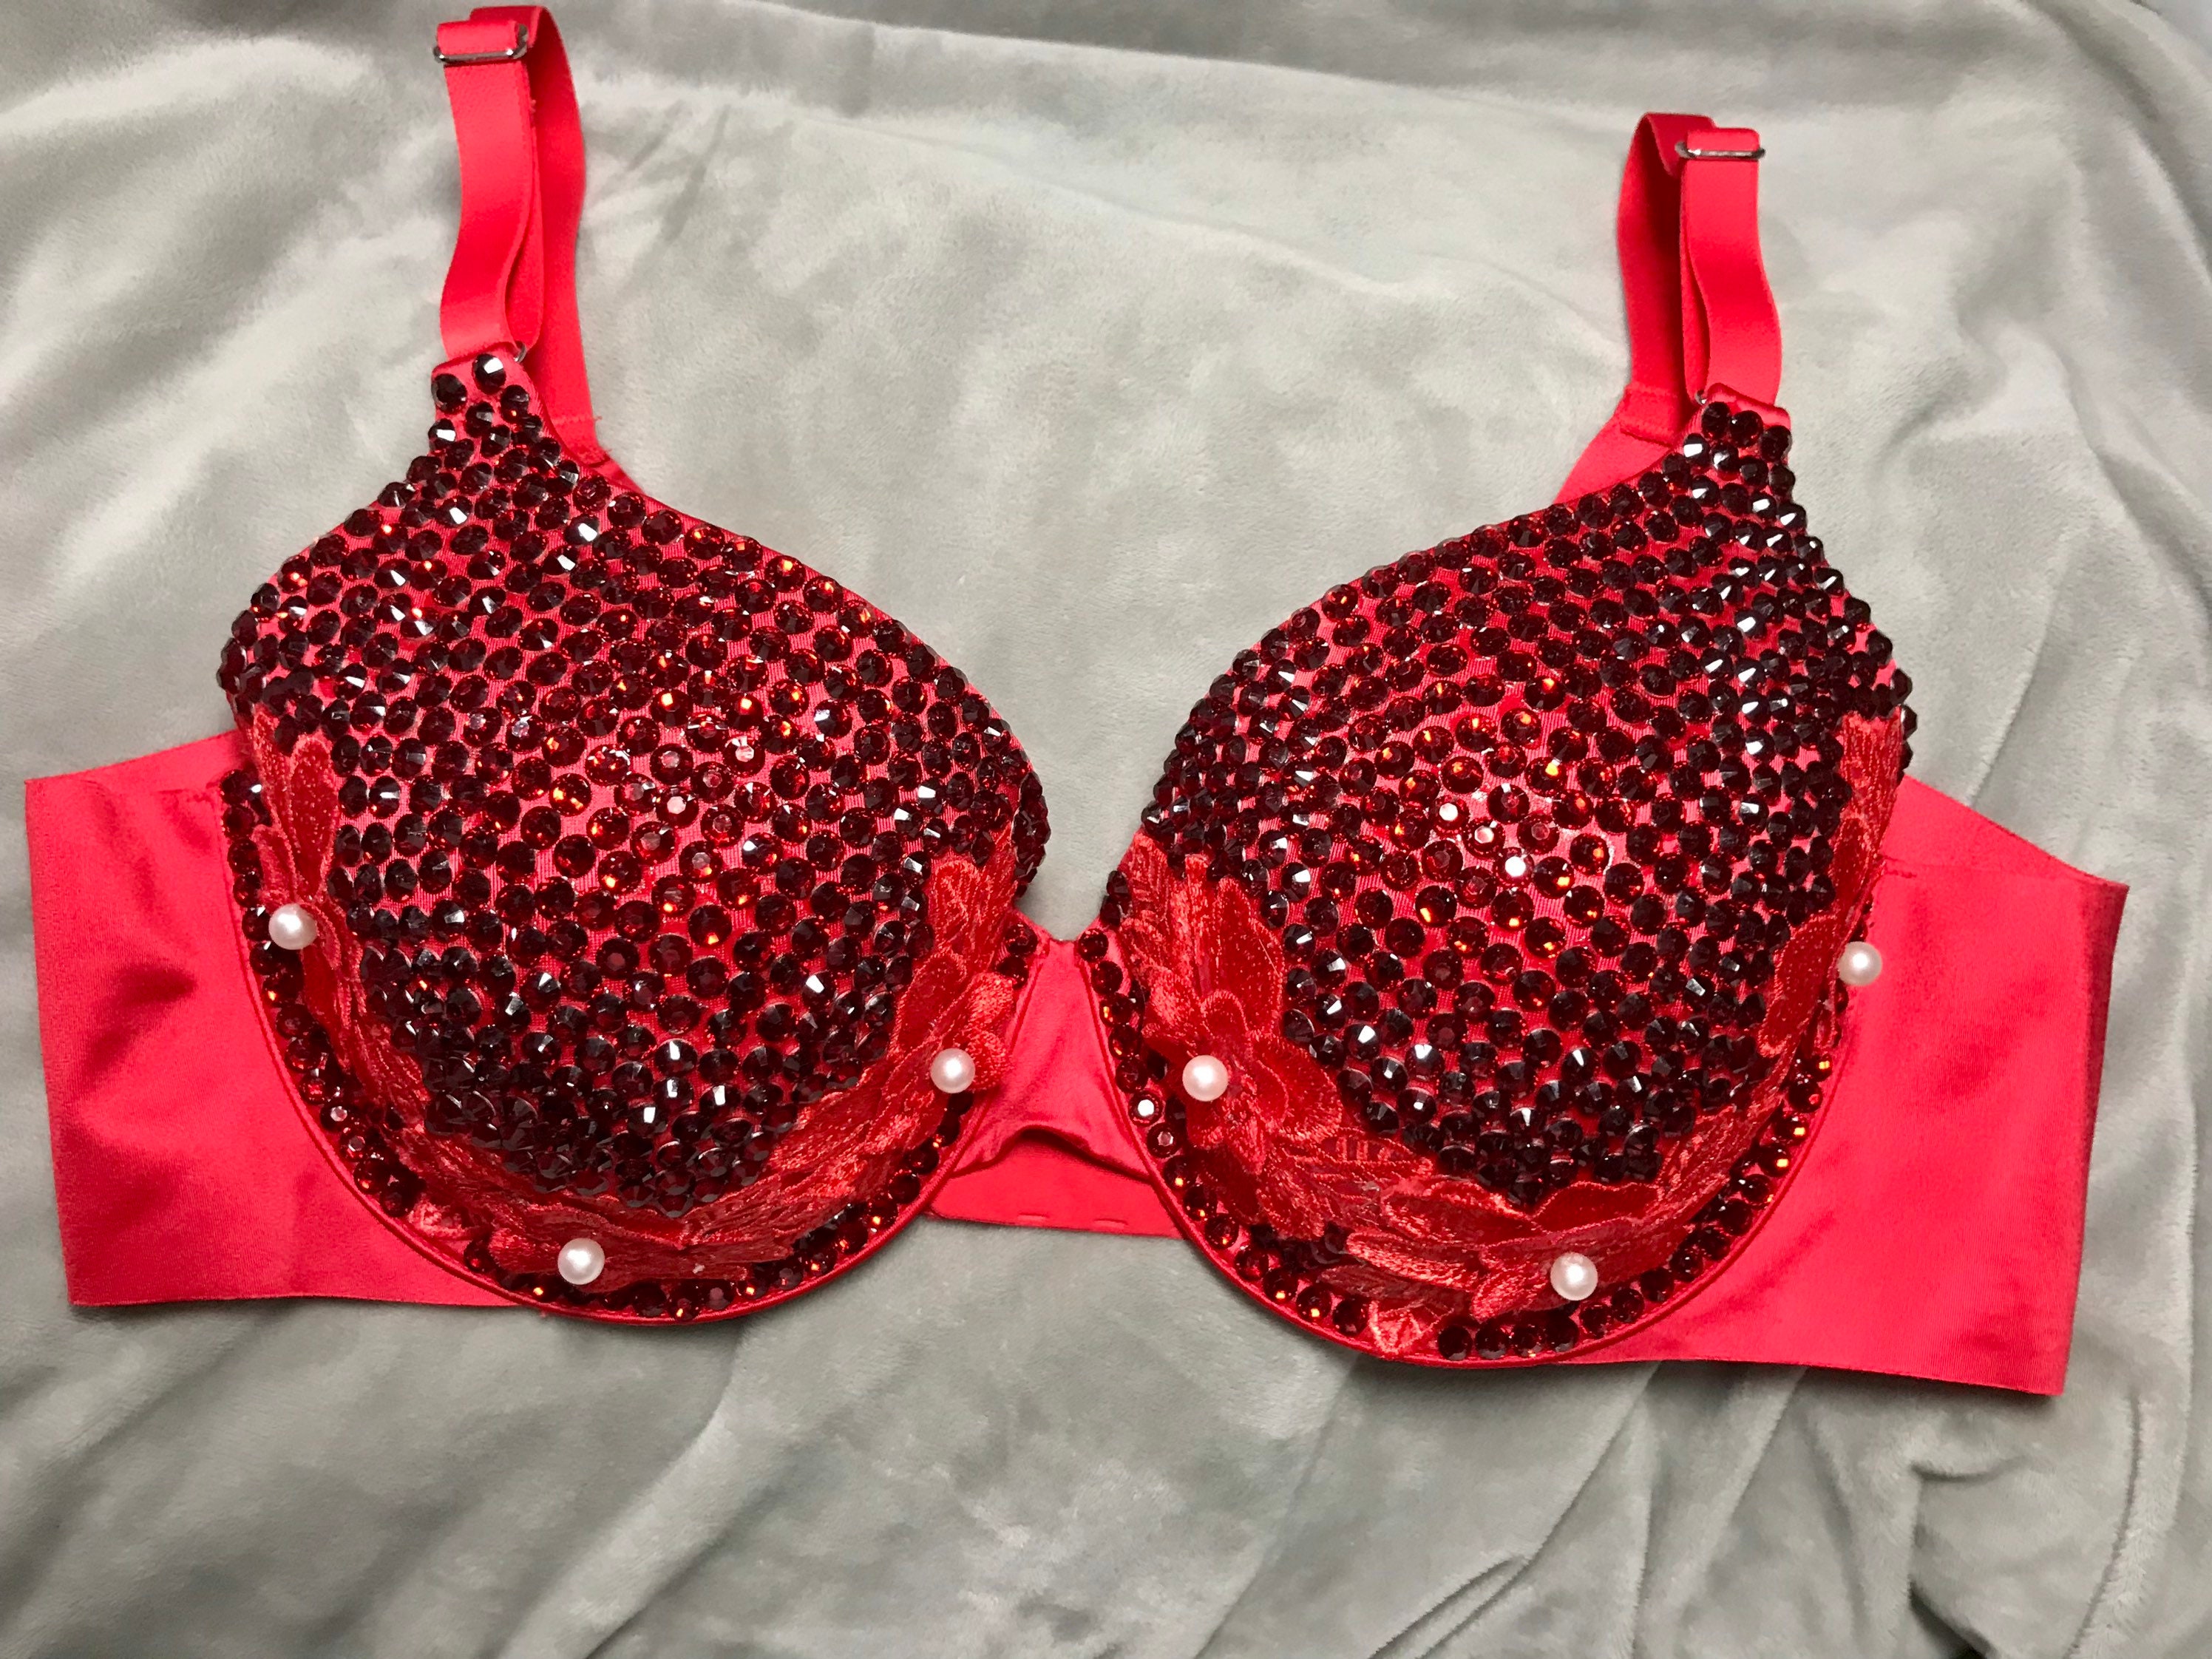 Red Rhinestone and Sequin Appliqué Embellished Push-up Bra, Size